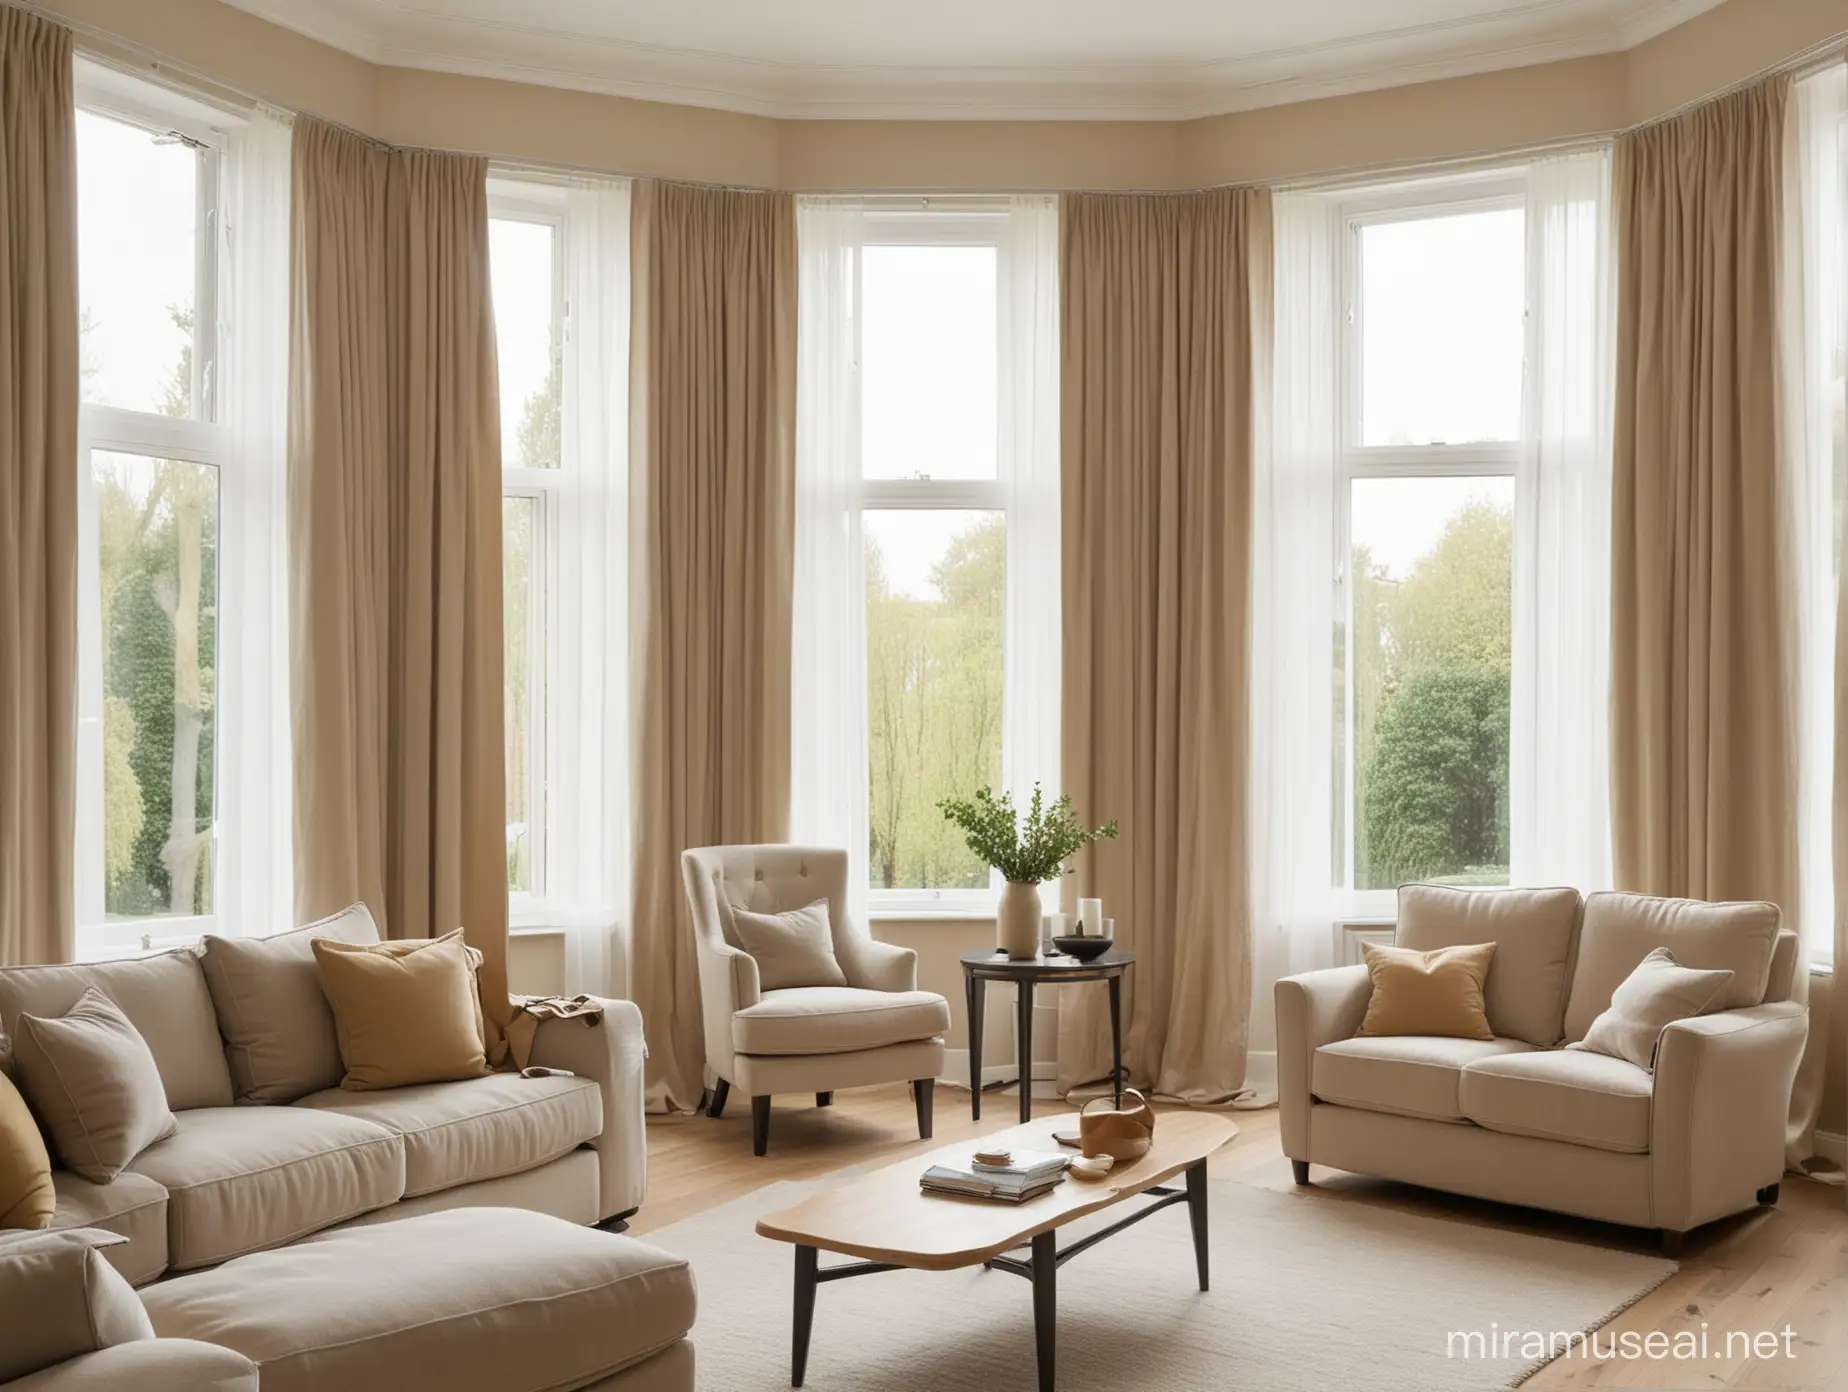 Cozy Living Room with Large Bay Window and Beige Curtains